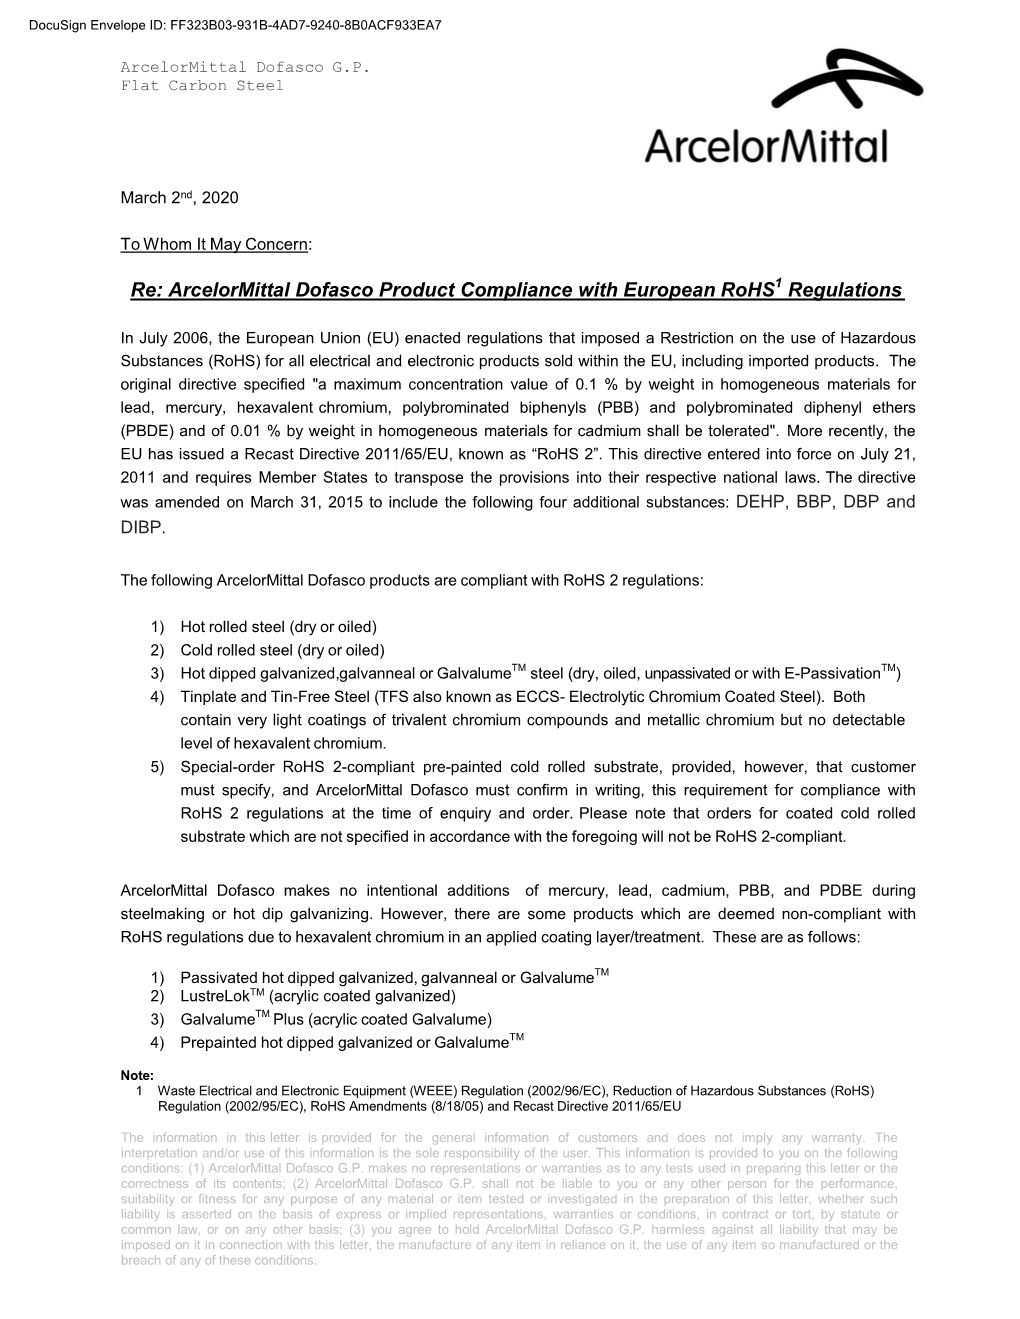 Re: Arcelormittal Dofasco Product Compliance with European Rohs1 Regulations